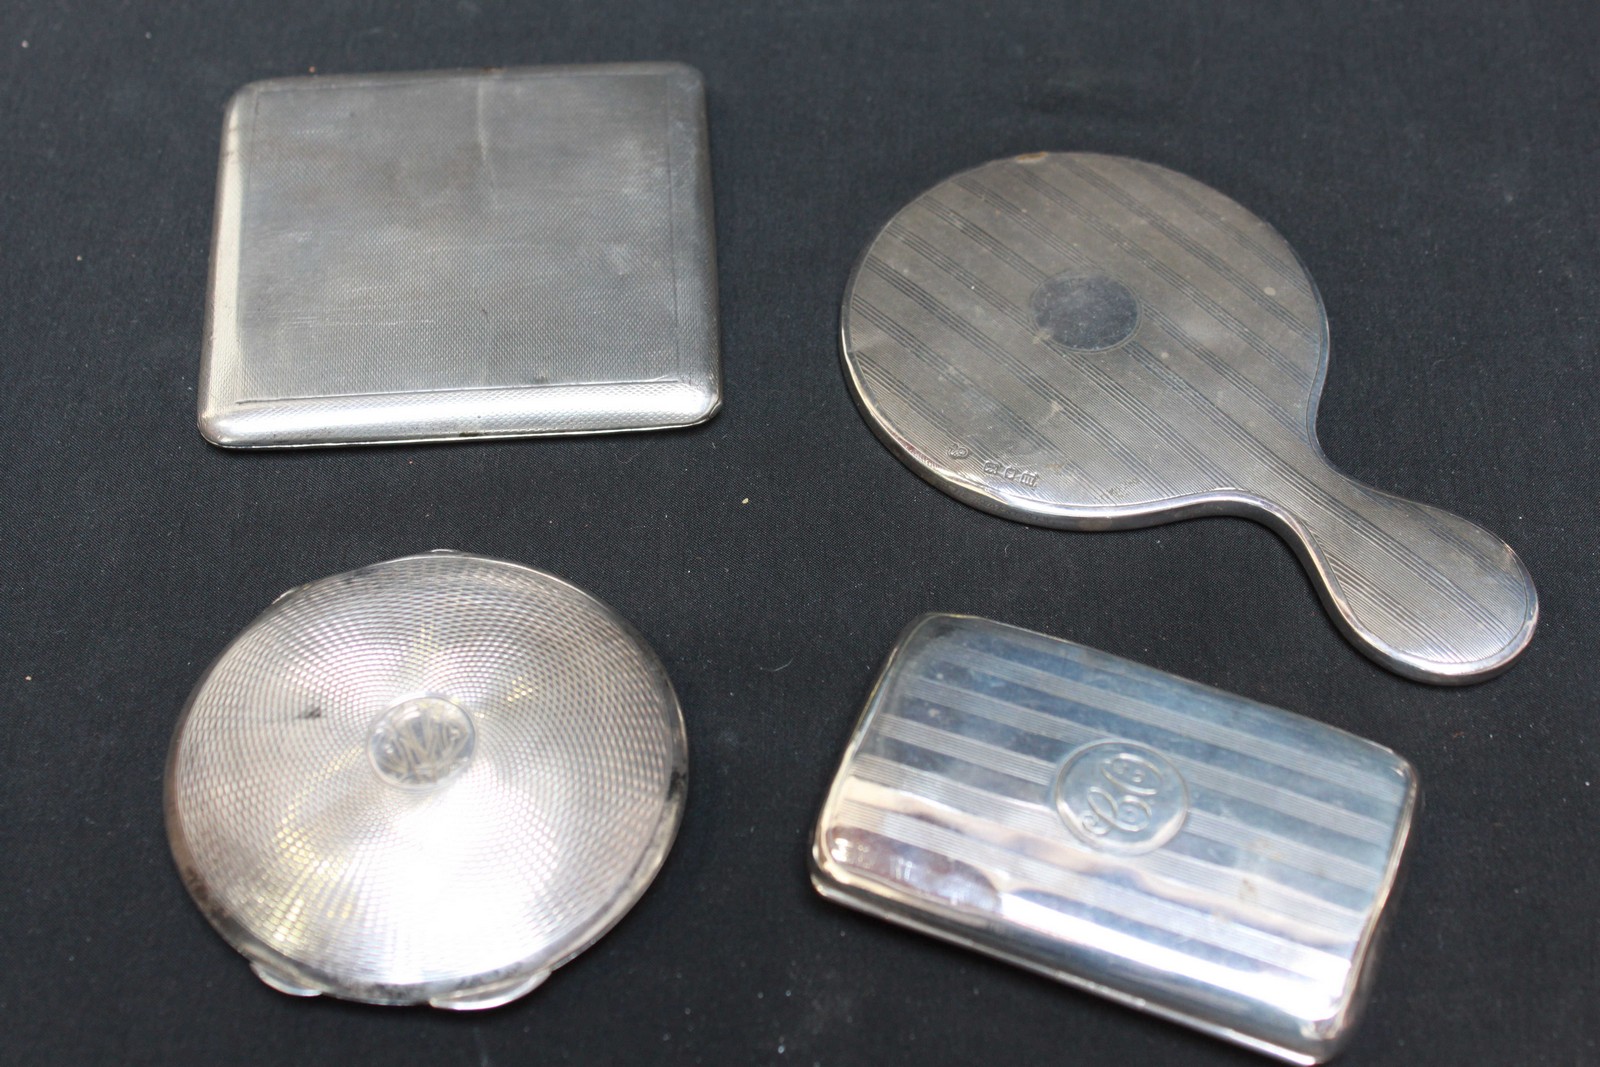 Two silver cigarette cases; a silver compact; and a miniature silver hand mirror. Weighable silver